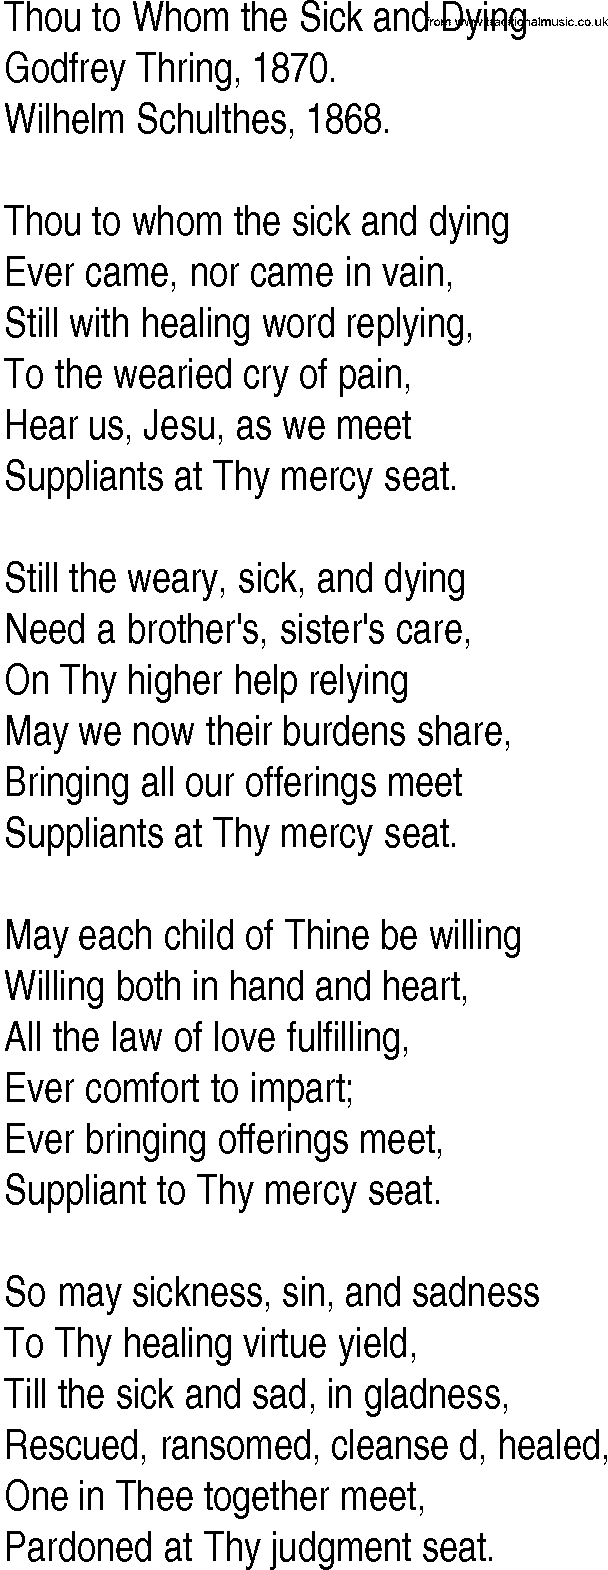 Hymn and Gospel Song: Thou to Whom the Sick and Dying by Godfrey Thring lyrics